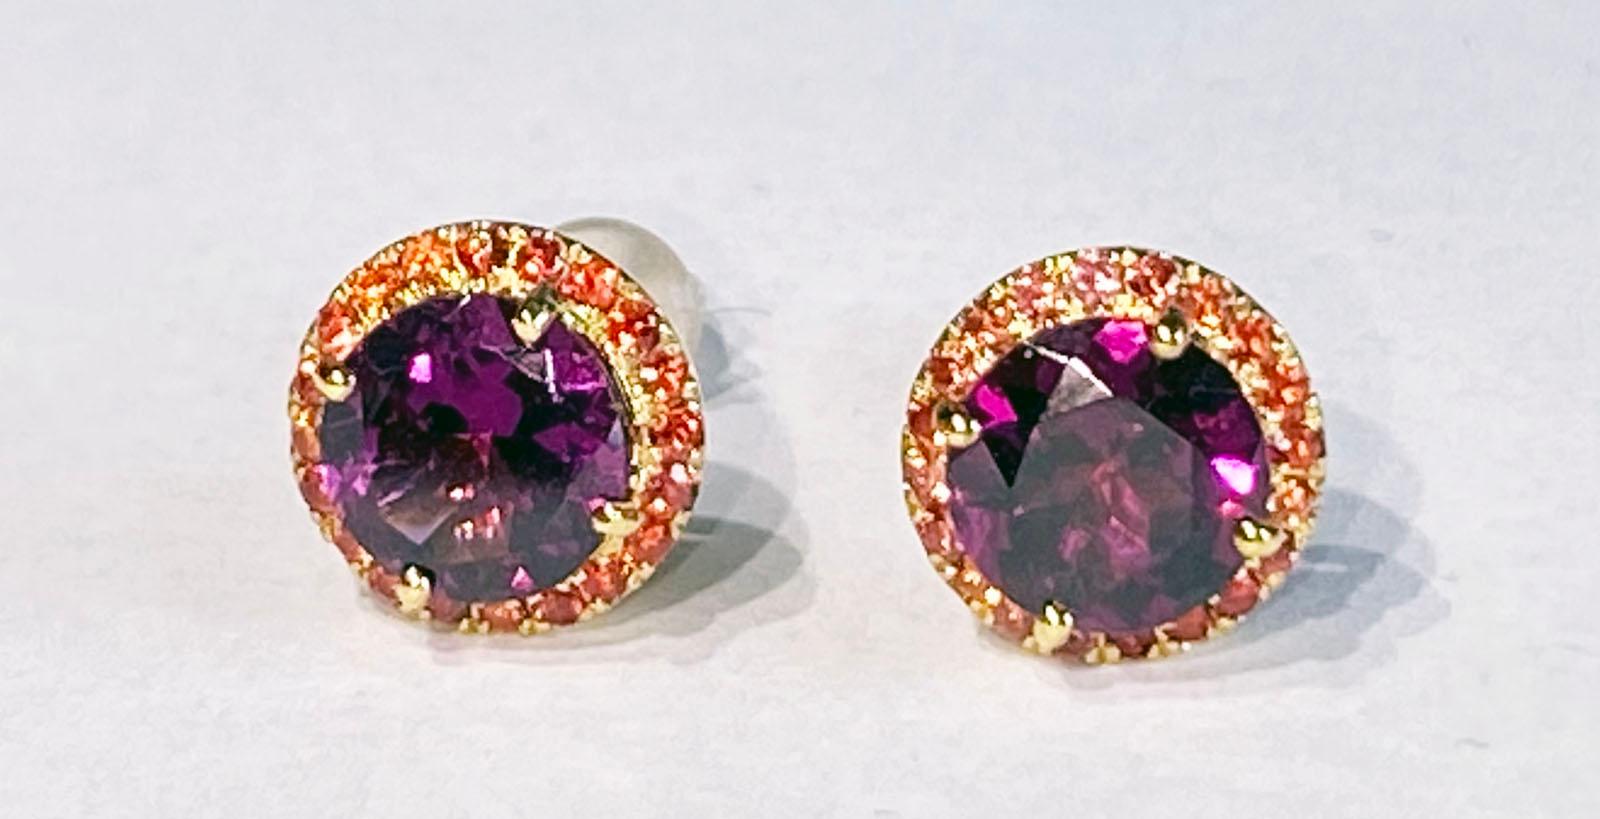 14Kt Yellow Gold Earrings set with Rhodolite Garnet & Orange Sapphire

Originally from San Diego, California, Kary Adam lived in the “Gem Capital of the World” - Bangkok, Thailand, sourcing local gem stones and working with local Metal Smiths on his